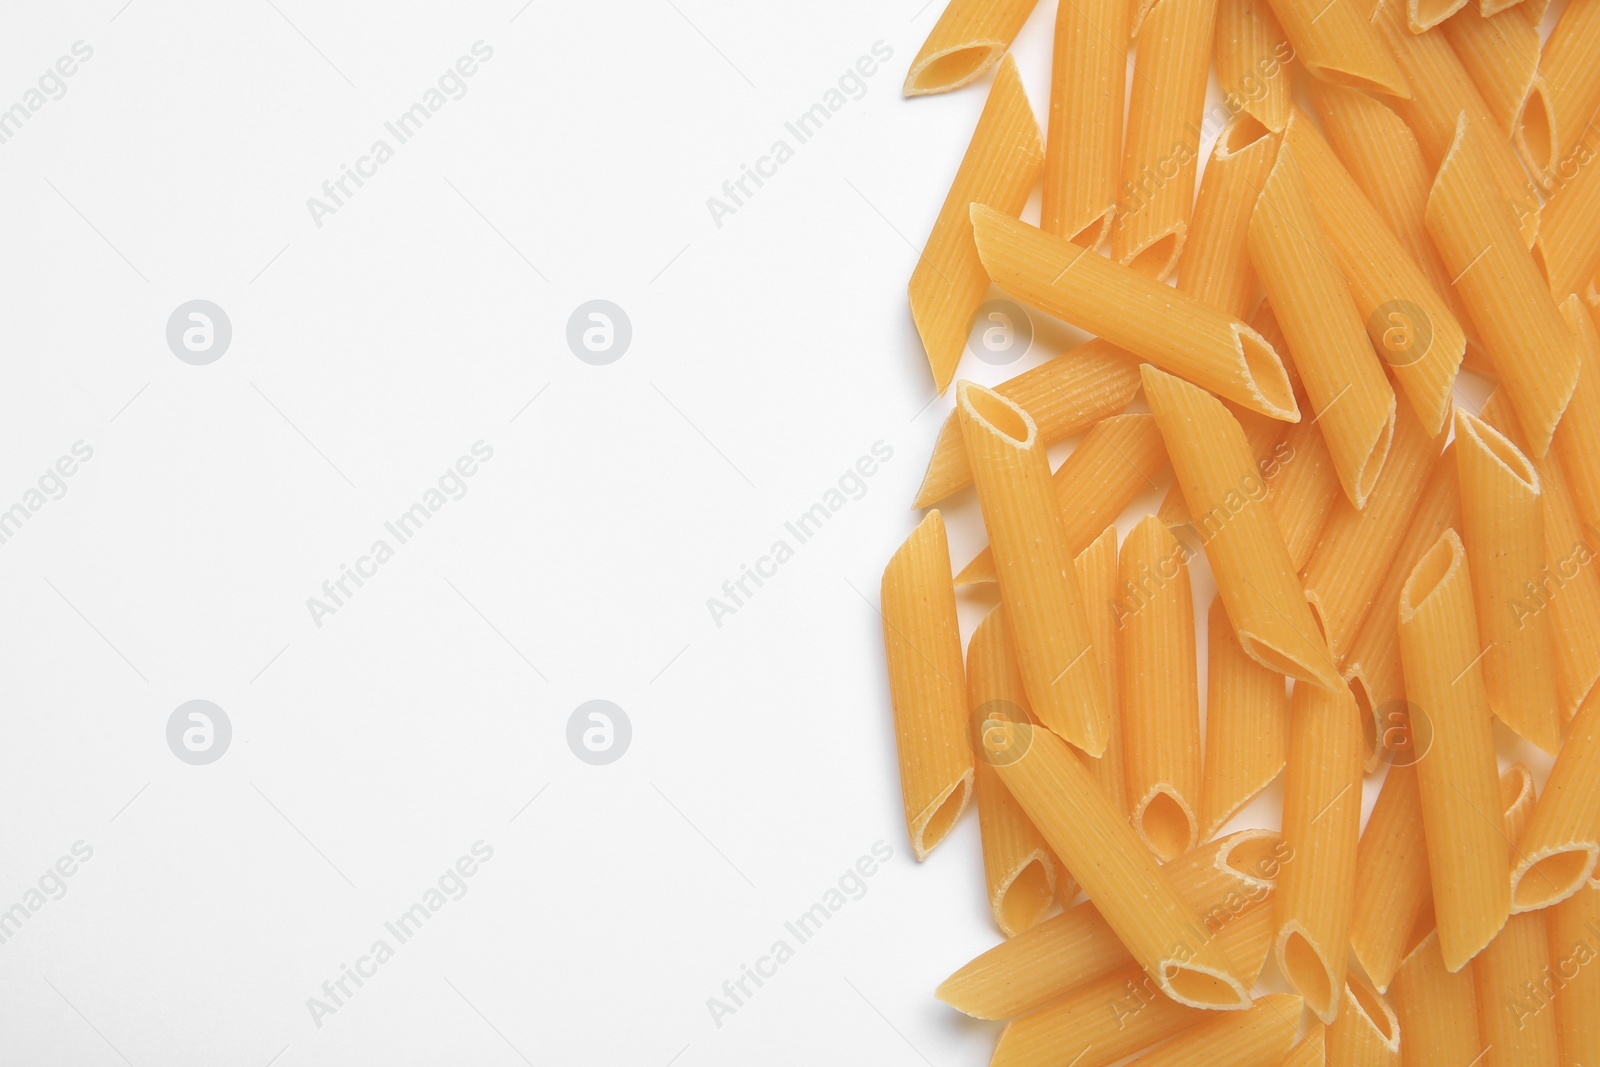 Photo of Raw penne pasta on white background, top view. Space for text